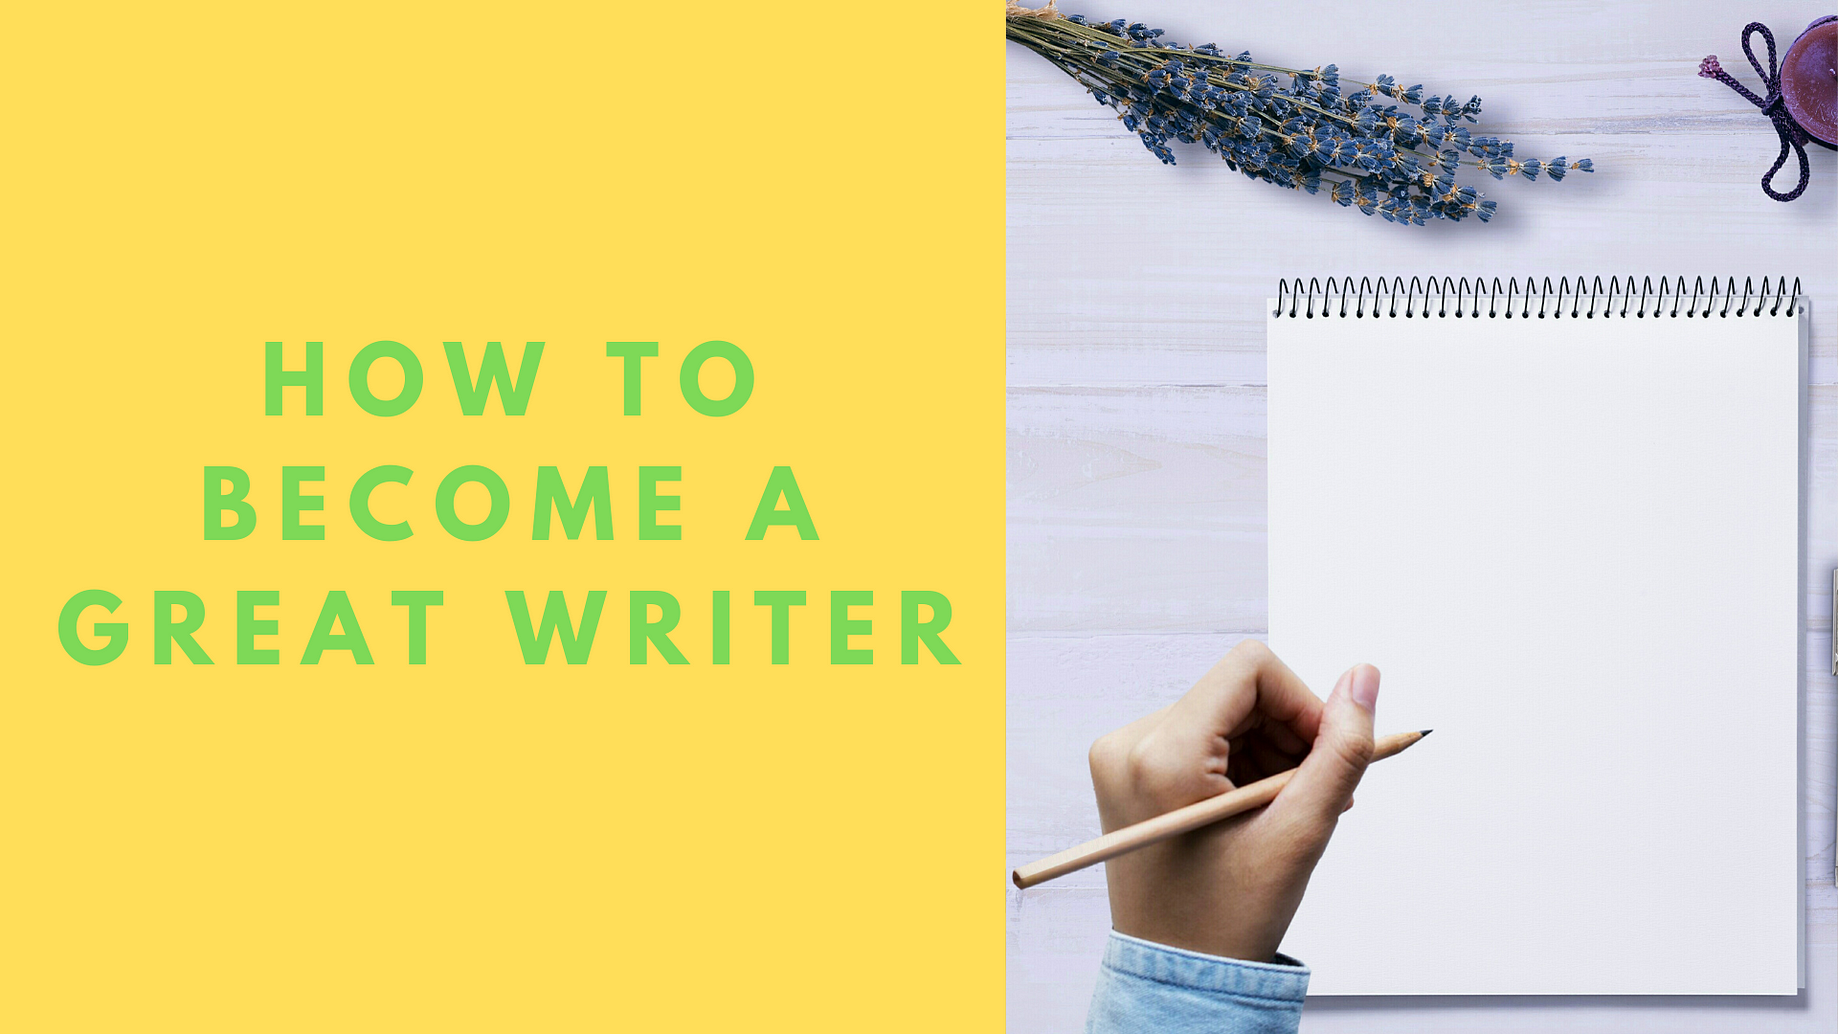 How To Become A Great Writer. Writing is an art form that can be